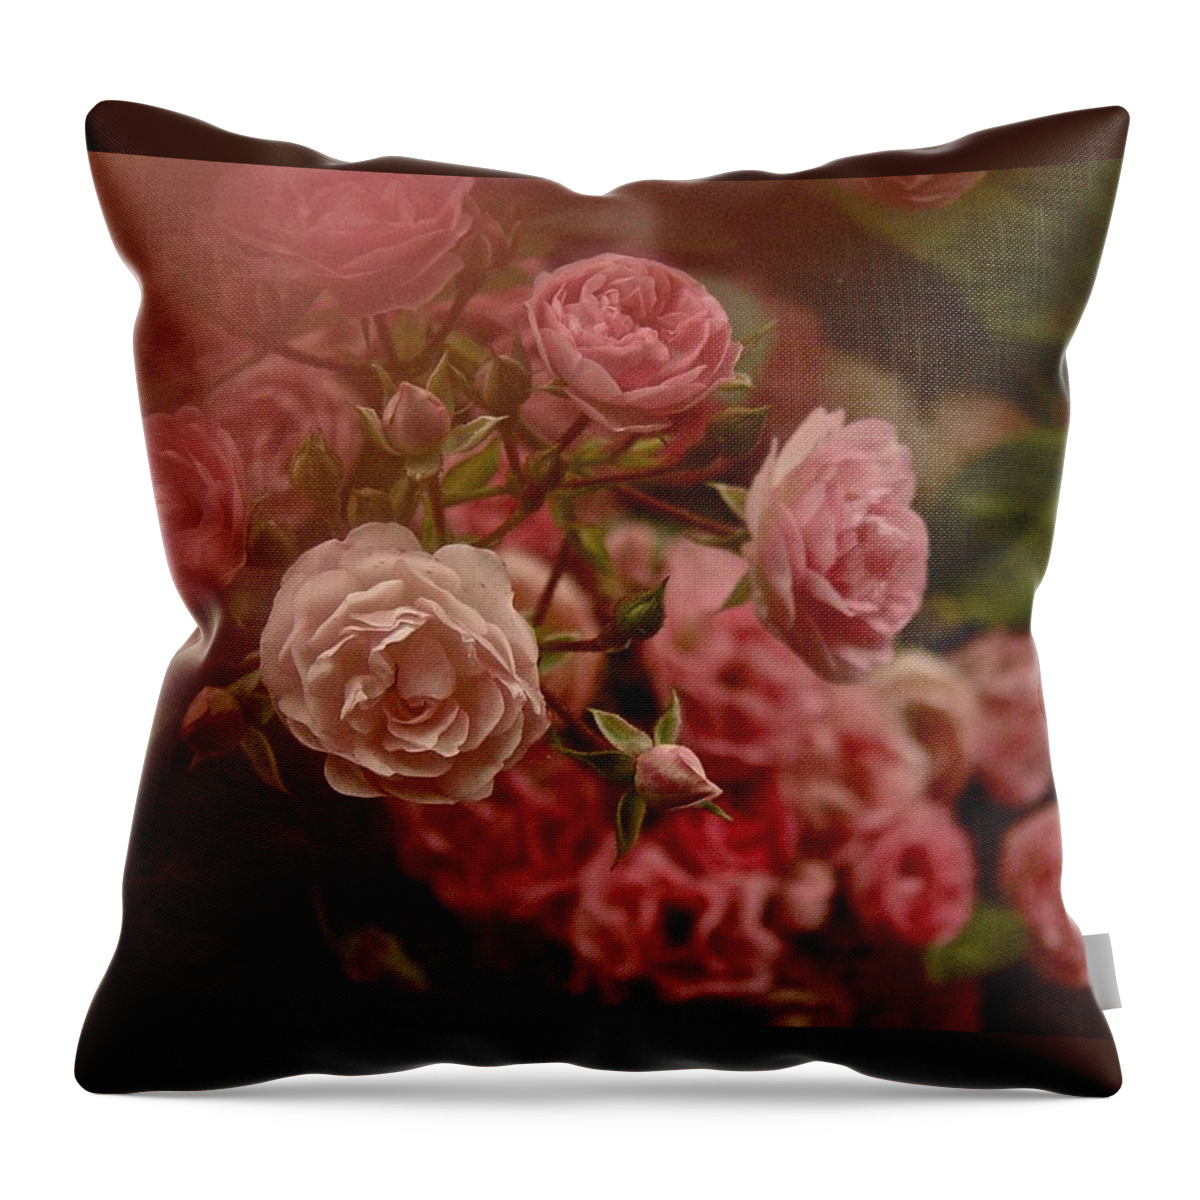 Roses Throw Pillow featuring the photograph Beautiful Roses 2016 No. 2 by Richard Cummings